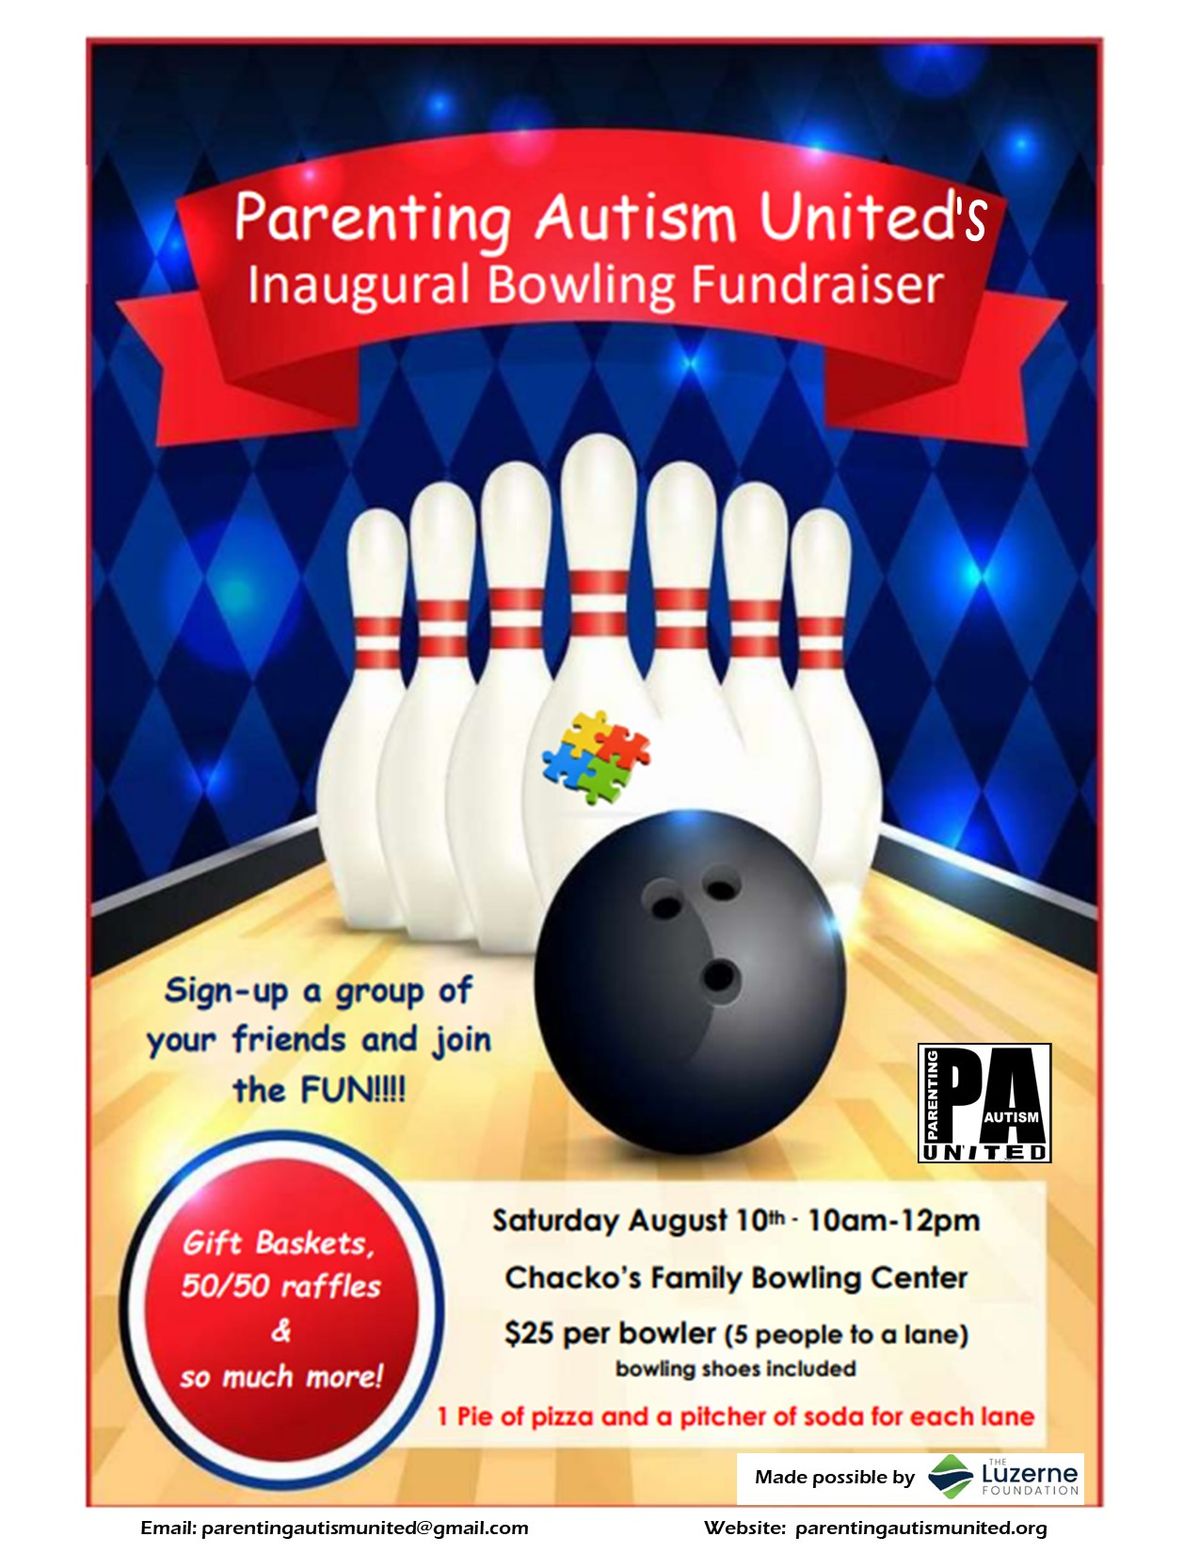 Parenting Autism United's Inaugural Bowling Fundraiser